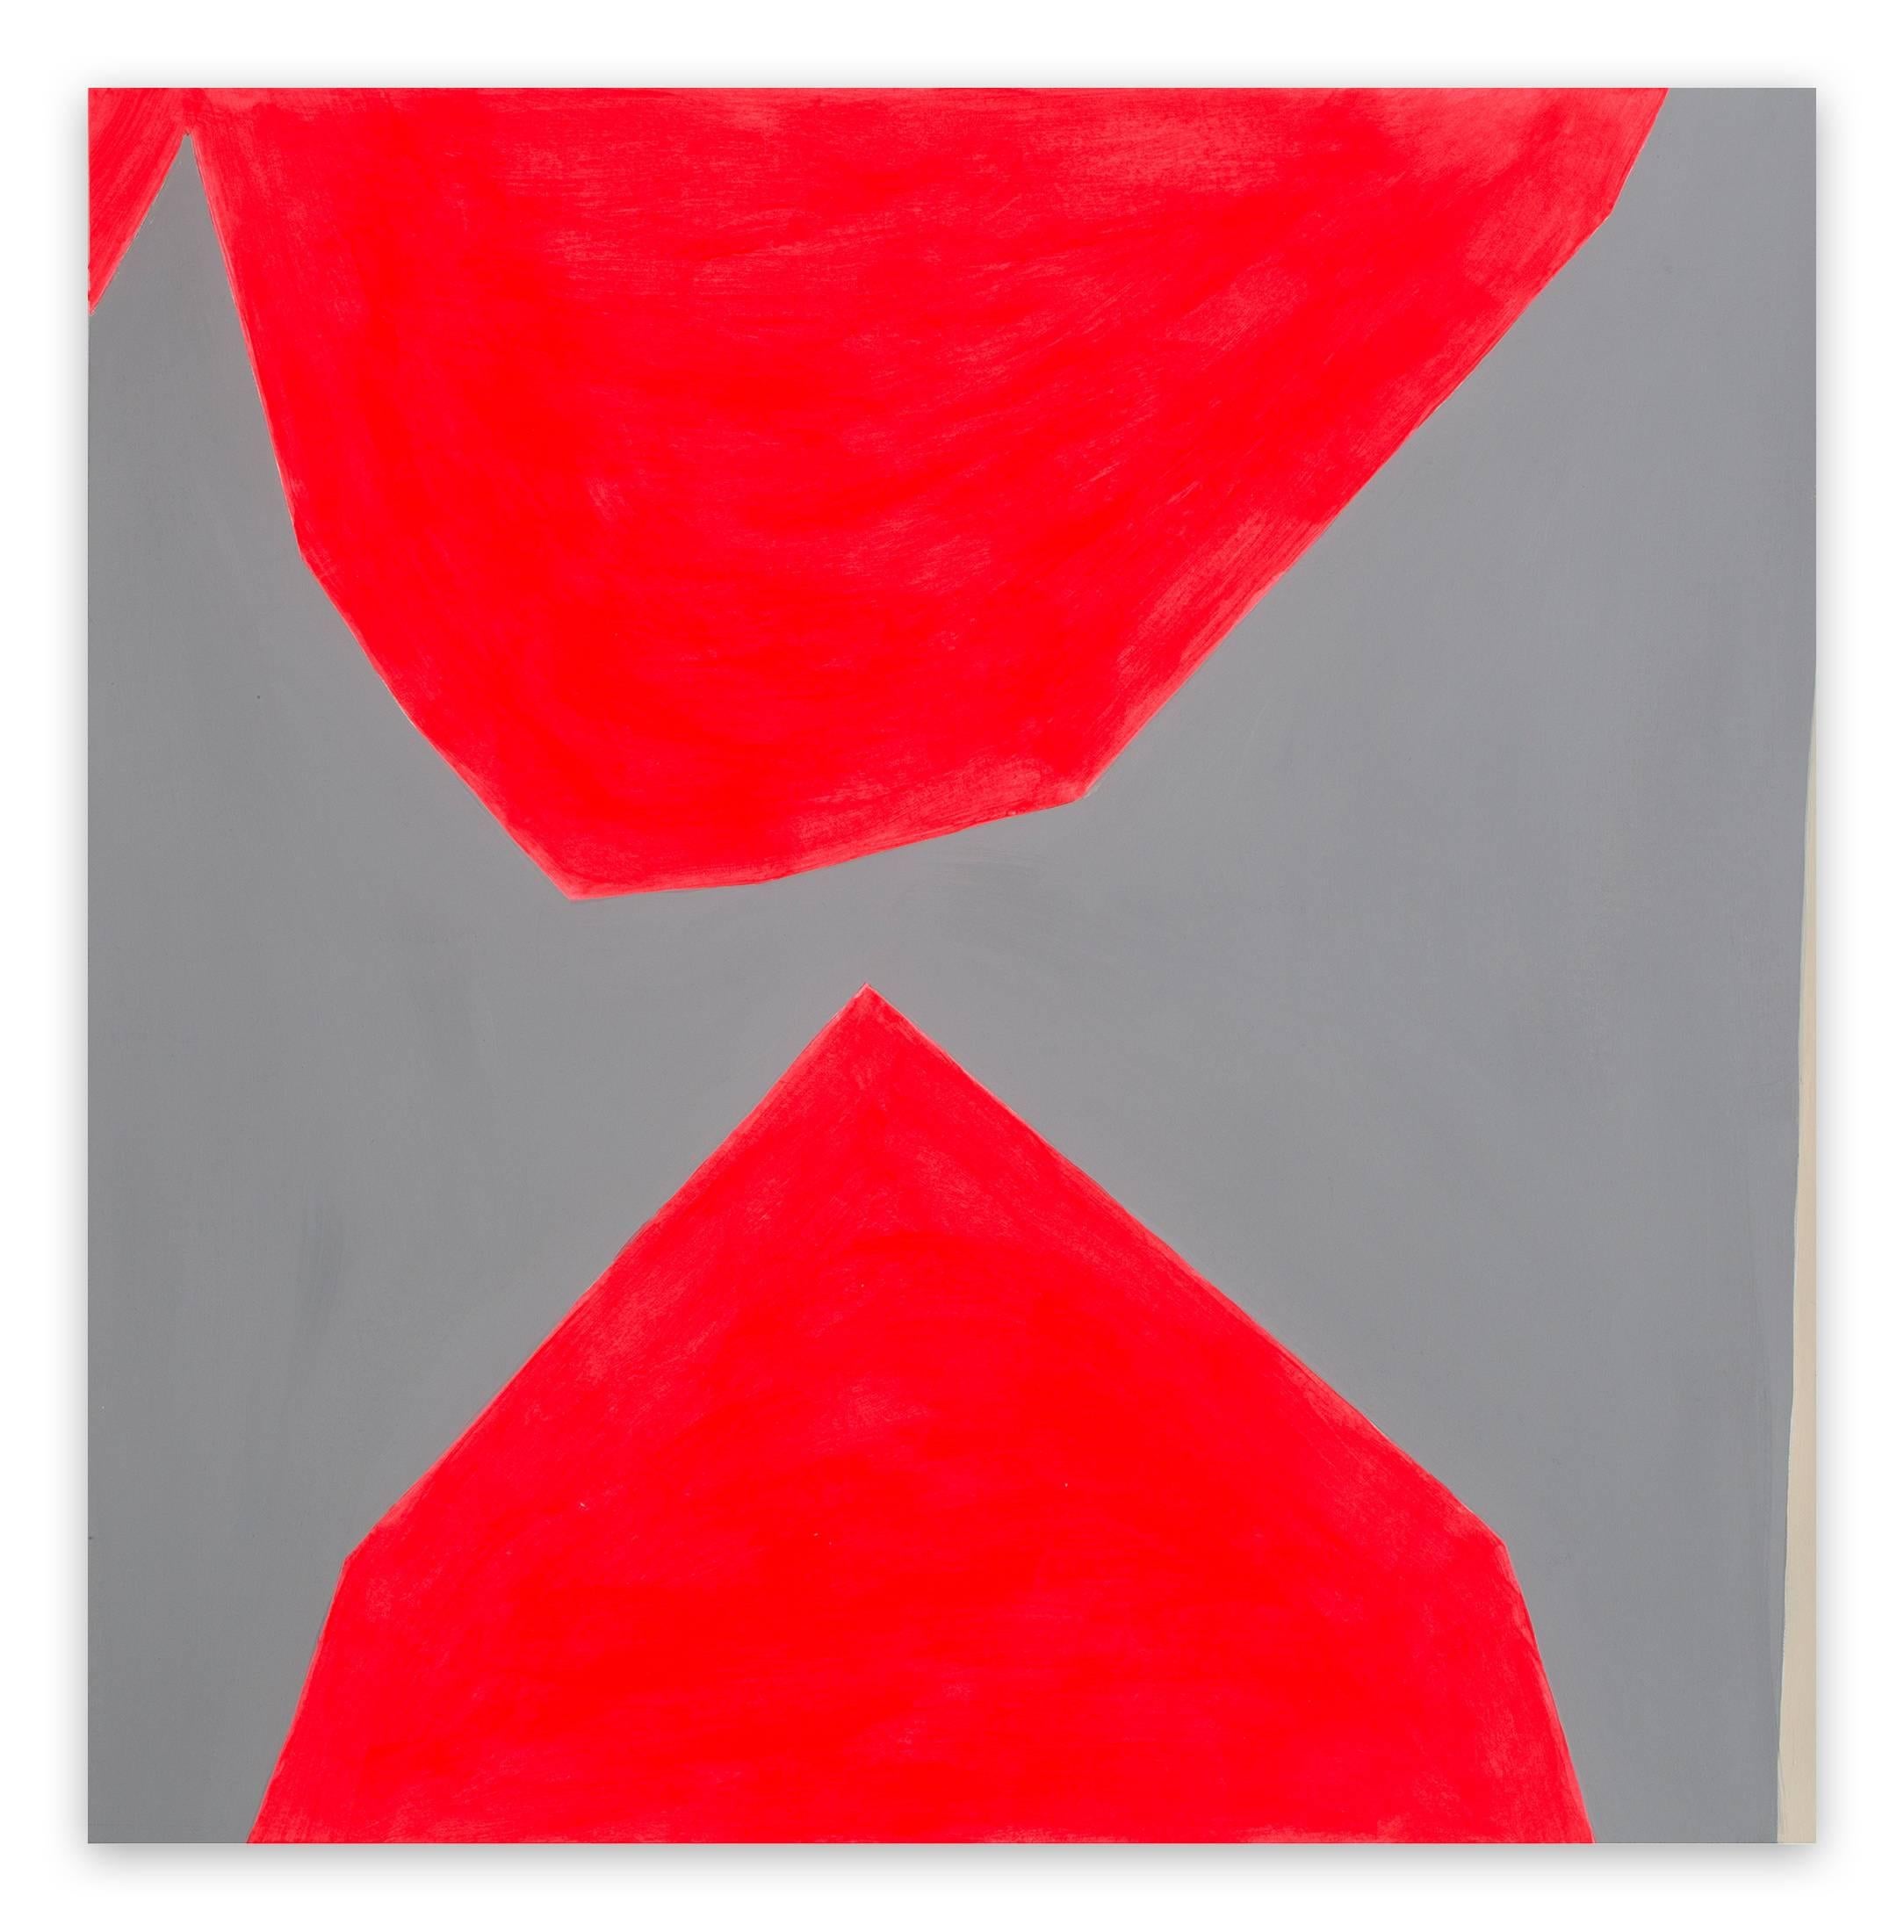 Cut-Up Paper I.26 (Abstract Painting)

Acrylic on paper. Unframed.

Pedersen works with acrylic paint.

When painting a composition, she tends toward a limited color palette, often reducing the composition to minimal, hard-edged shapes on